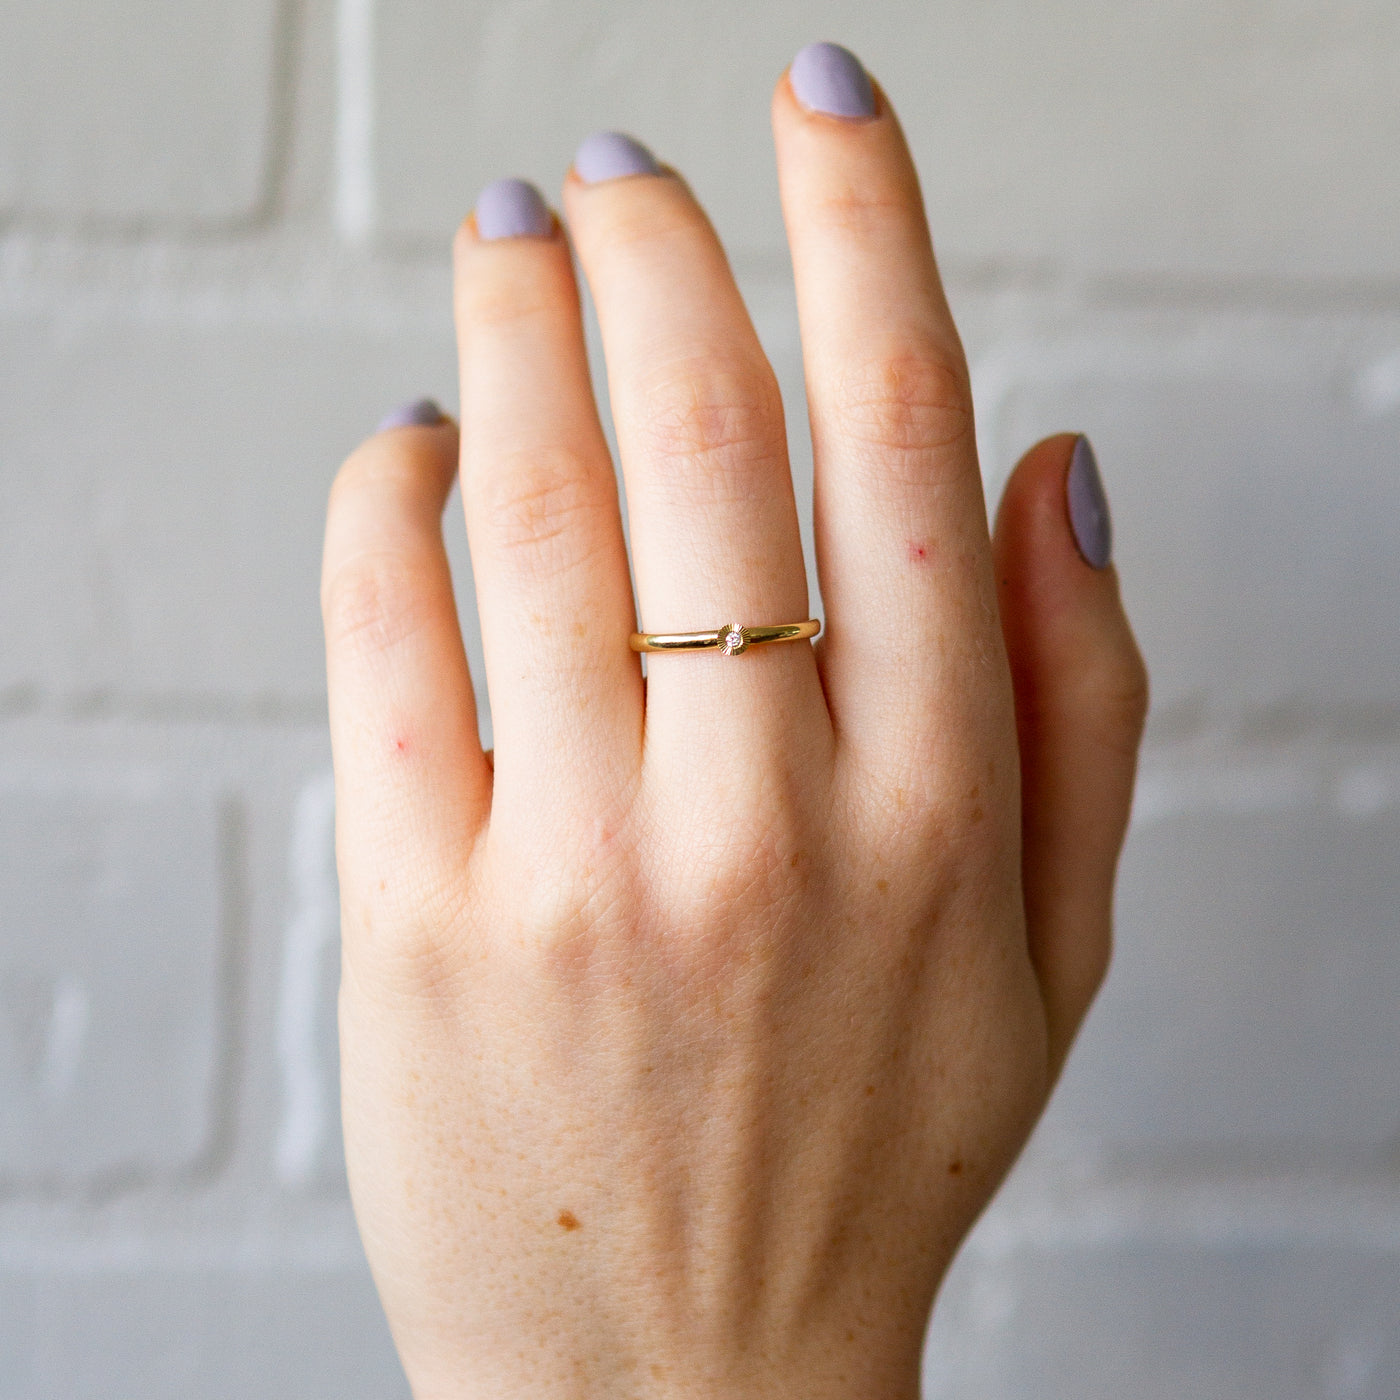 14k Yellow Gold small aurora stacking ring with a 1.5mm center diamond and engraved border on a hand